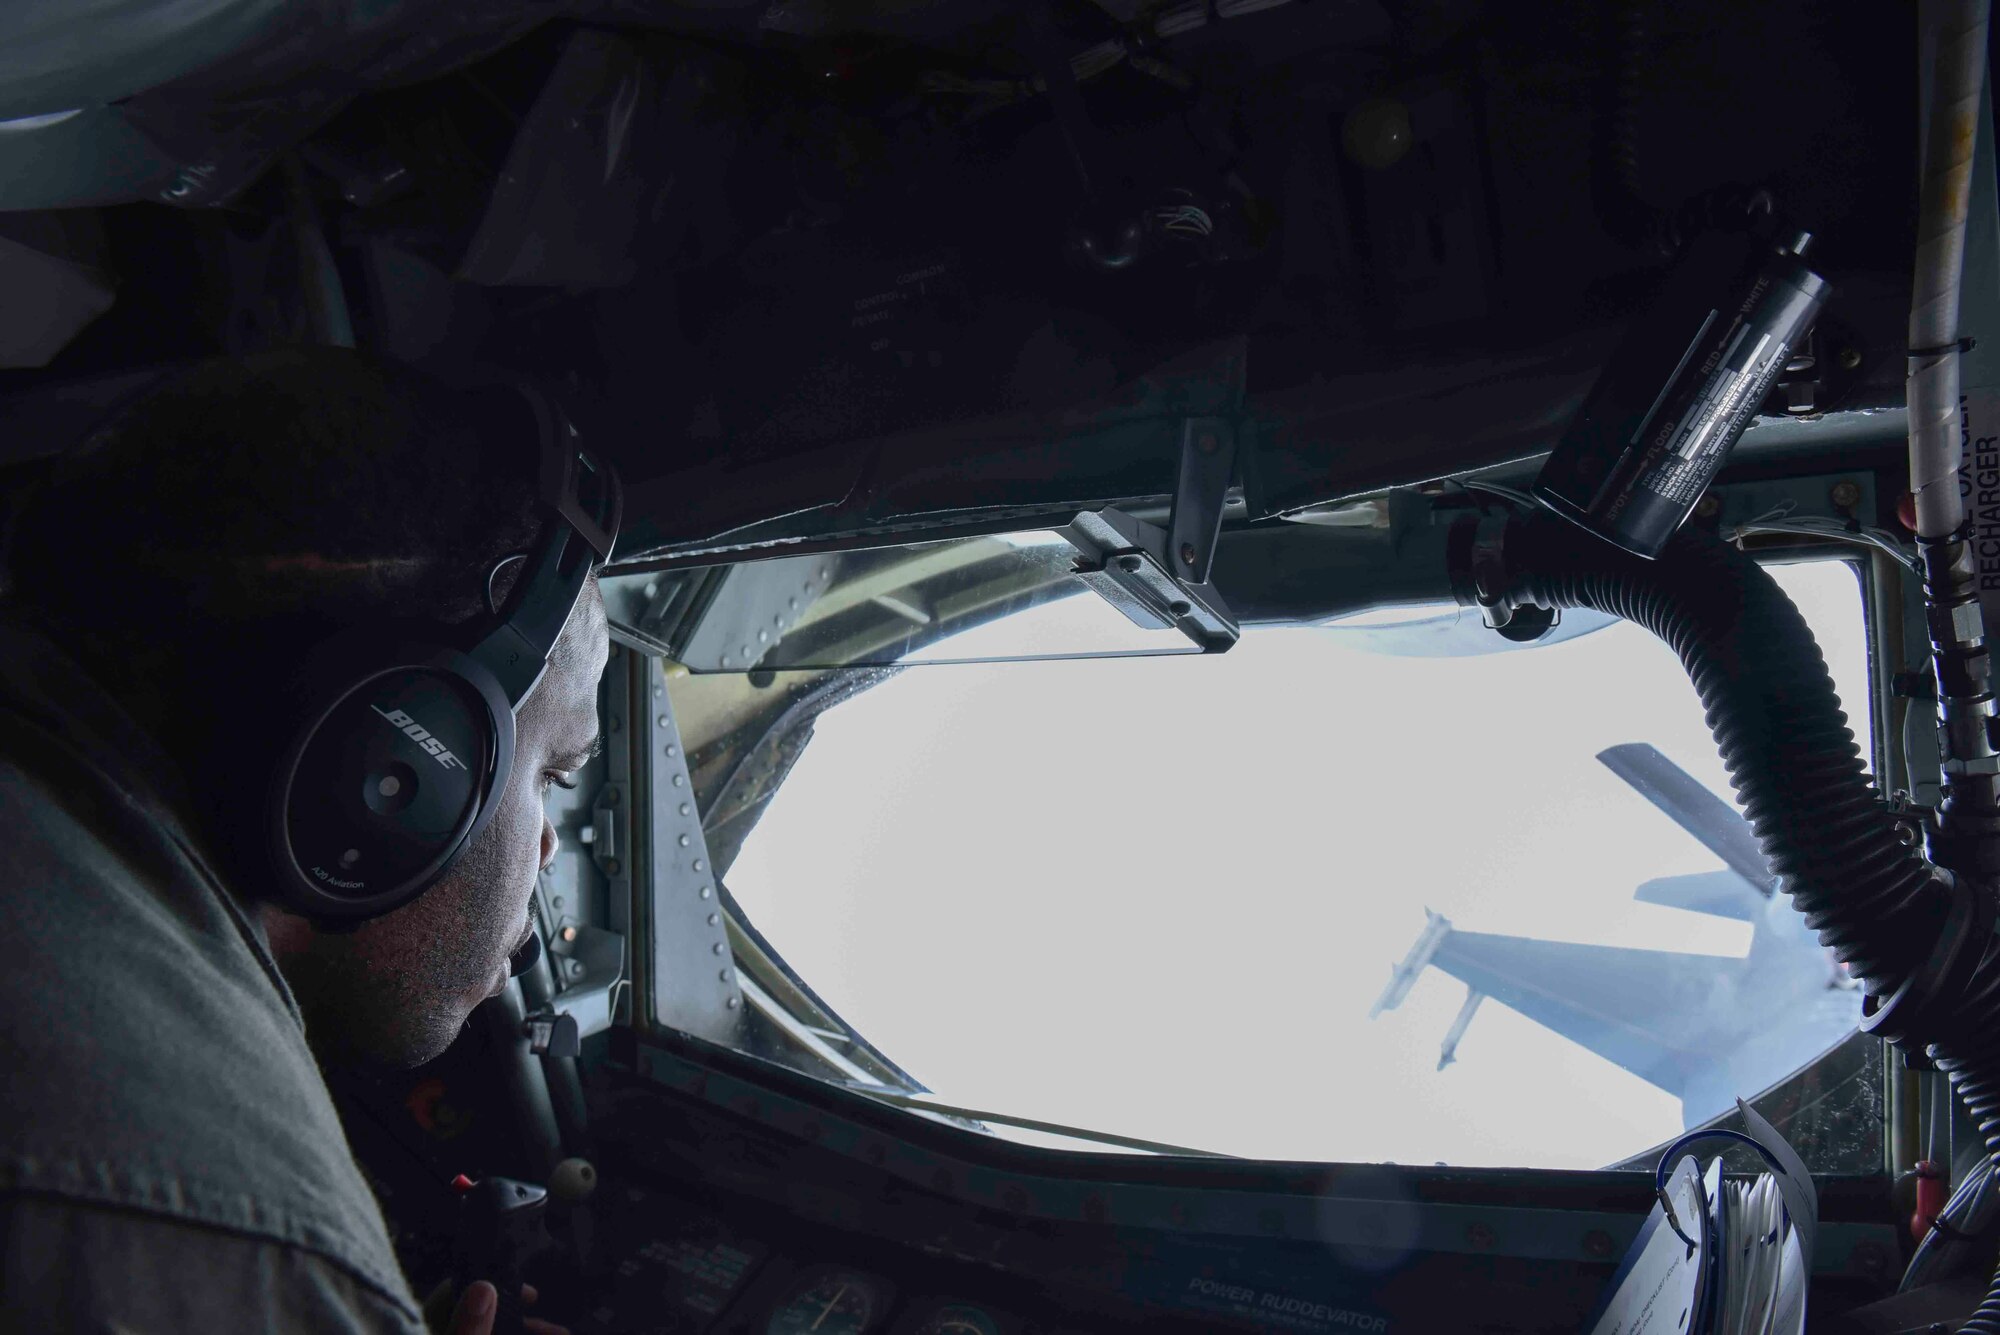 U.S. Air Force Tech. Sgt. Jonathon Rogers, 93rd Air Refueling Squadron boom operator, performs air refueling maneuvers with an F-16 Fighting Falcon from the Red Tail Squadron of the 187th Fighter Wing while flying over Alabama, February 18, 2020. Every F-16 that participated in the air refueling was piloted by a black Airman from the Tuskegee Airmen’s honorary ‘Red Tail’ Squadron. (U.S. Air Force photo by Airman 1st Class Kiaundra Miller)